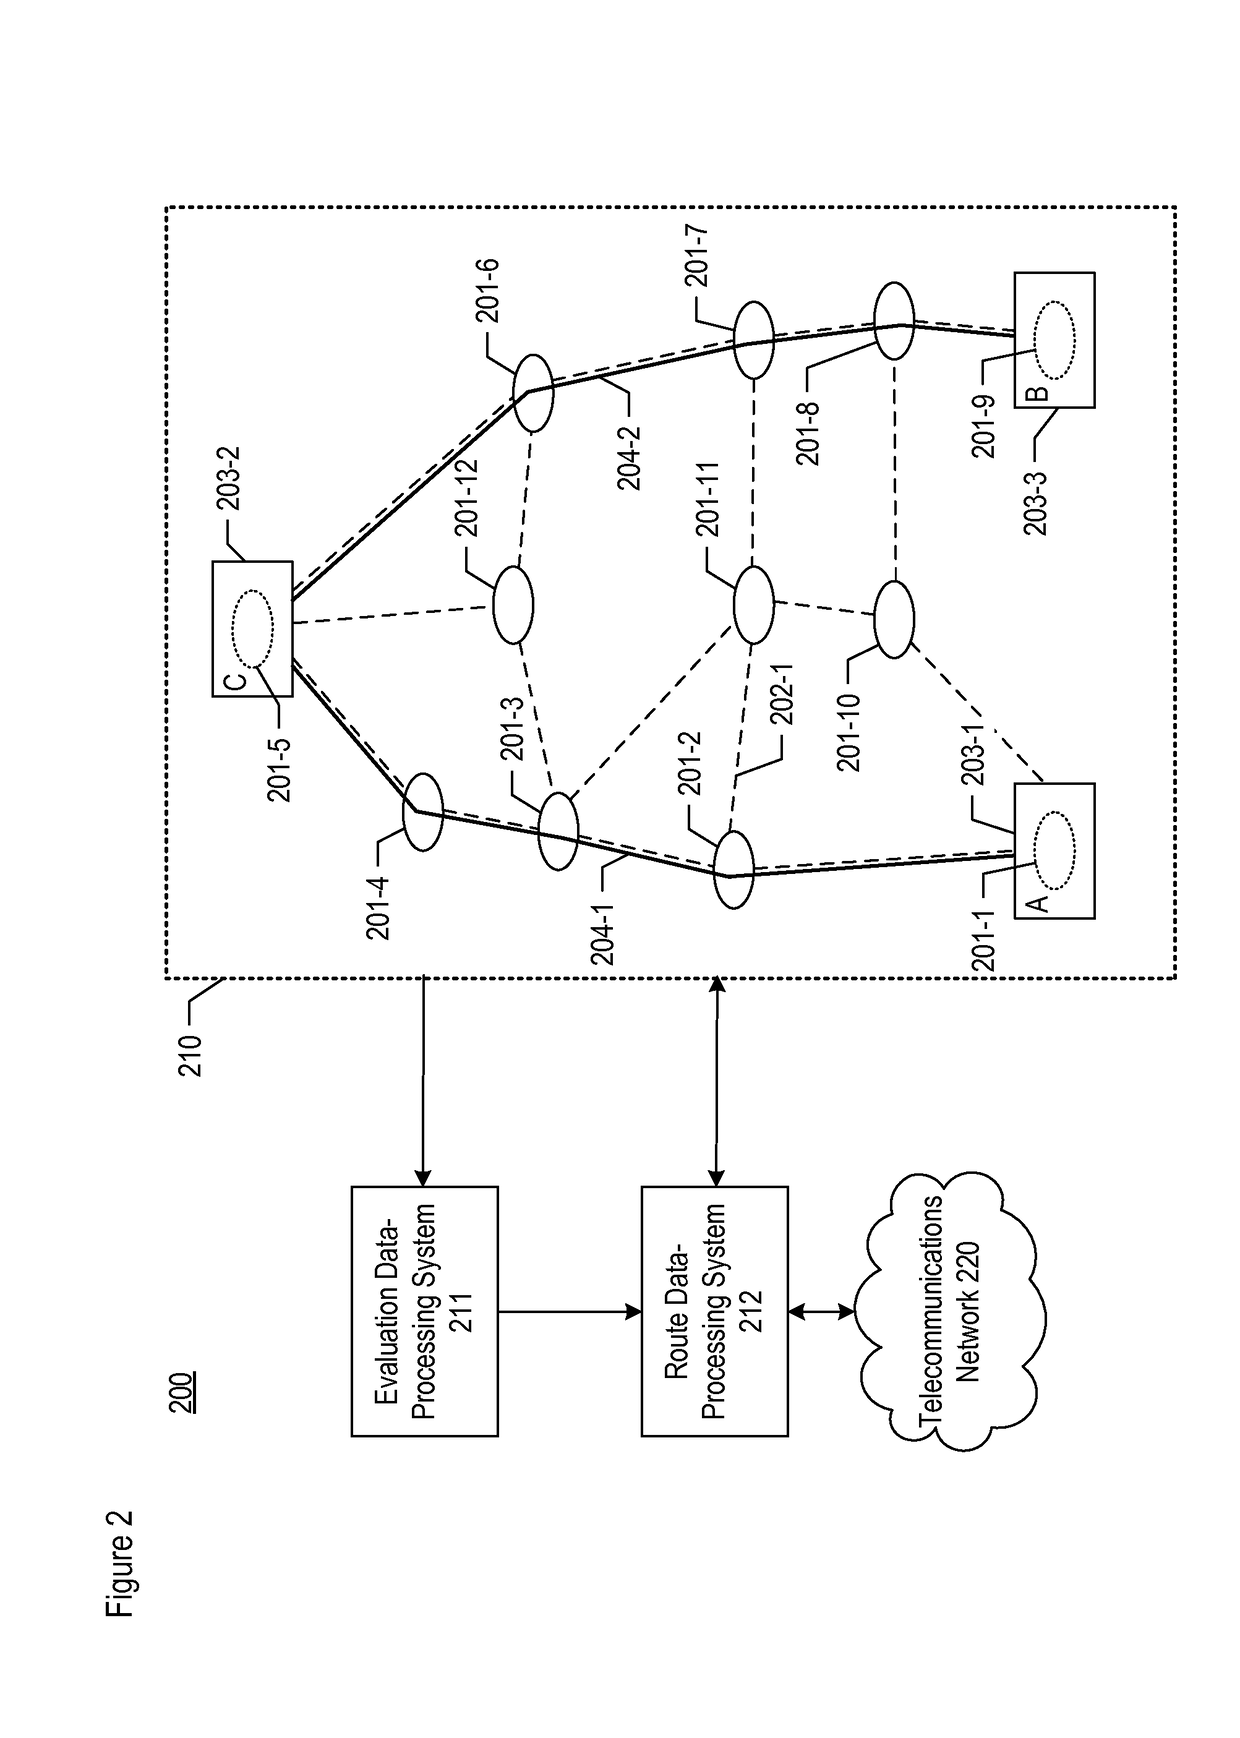 System and method for discovering the locations of potential layer-2 nodes in a telecommunications network